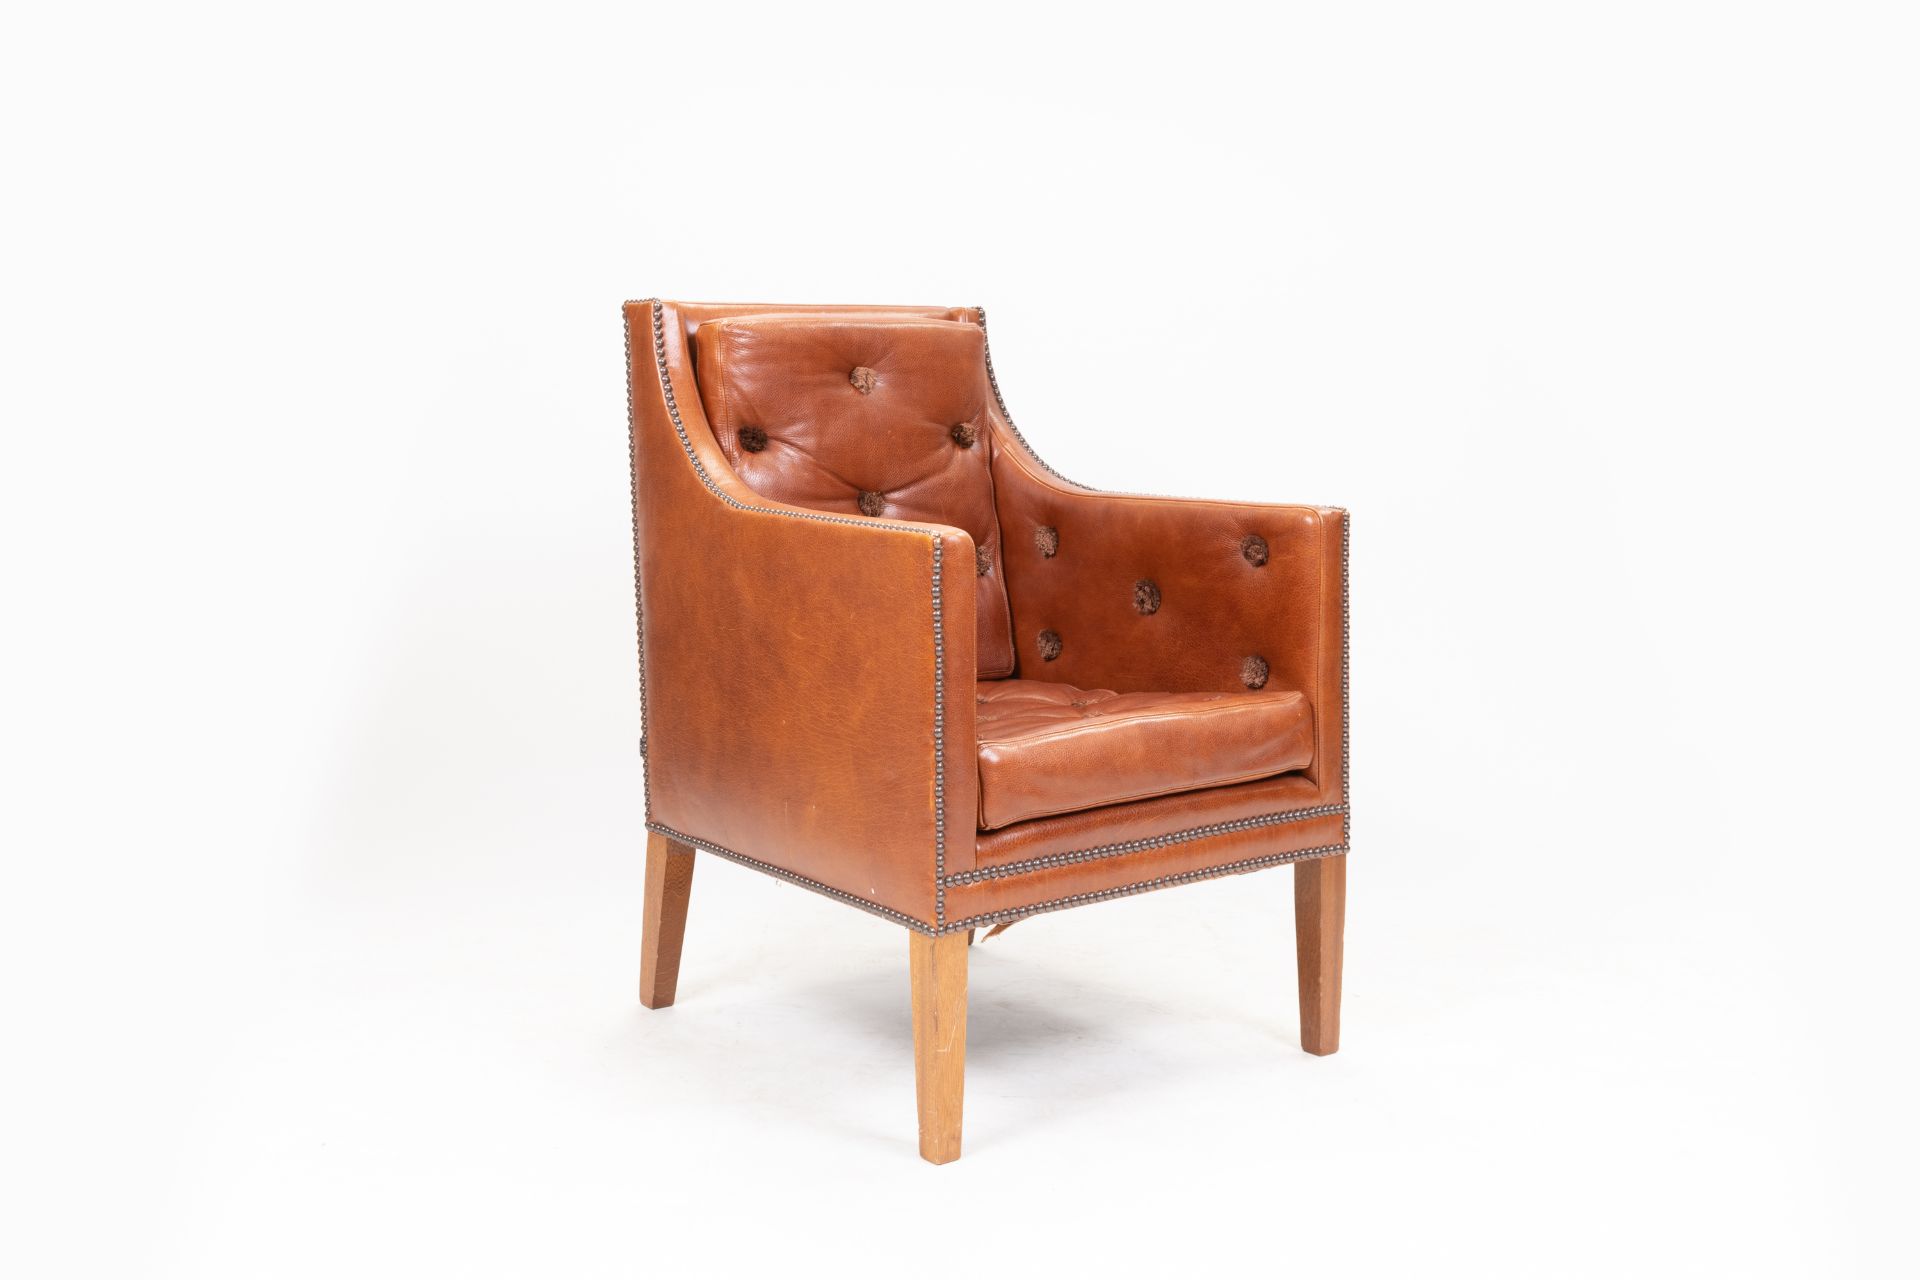 David Linley Lord Nelson Armchair - Image 2 of 8